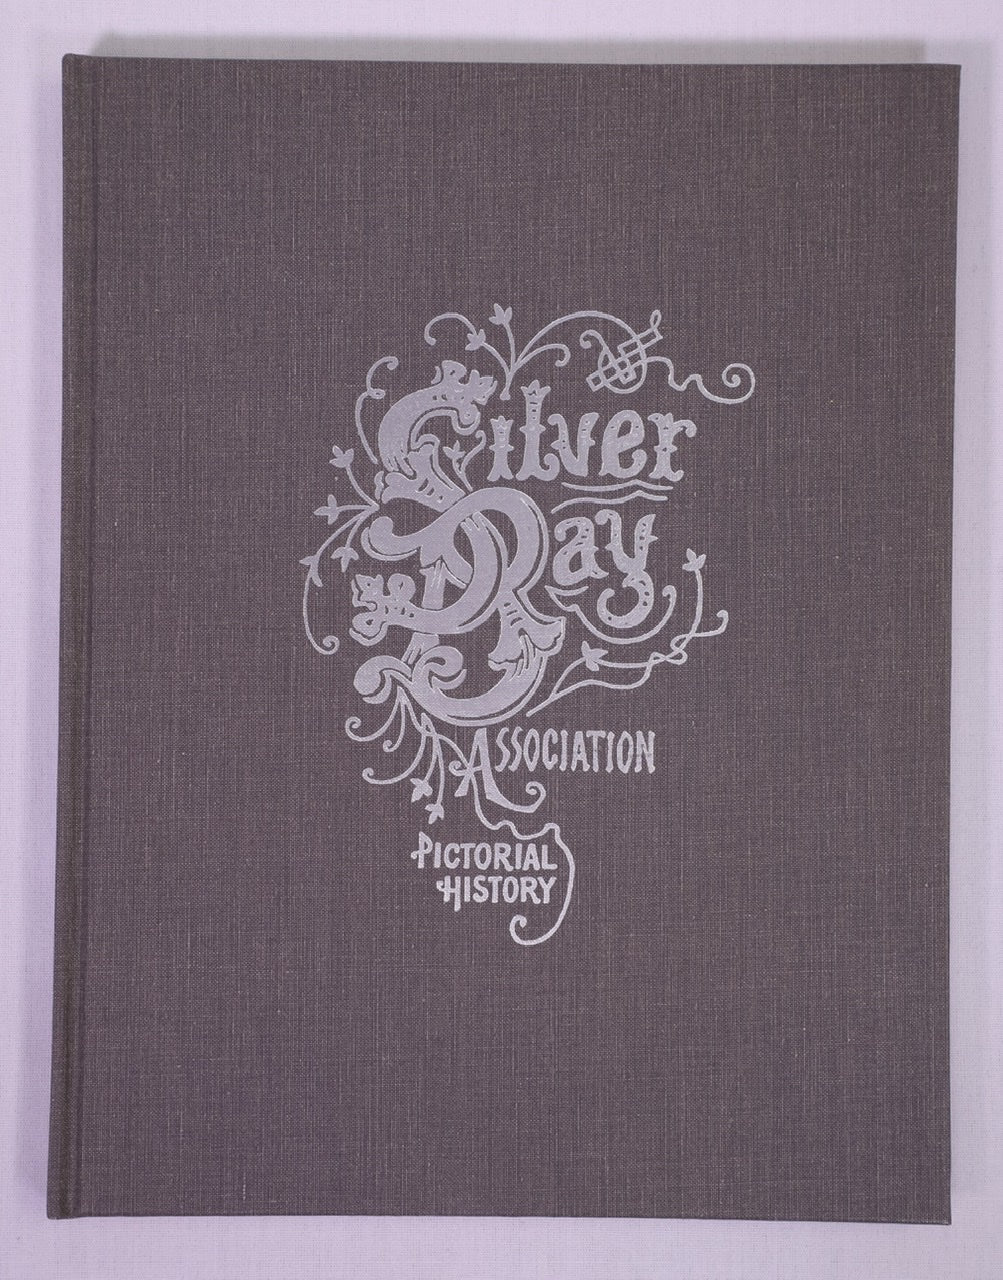 Silver Bay Association A Pictorial History Grey 1902-1935